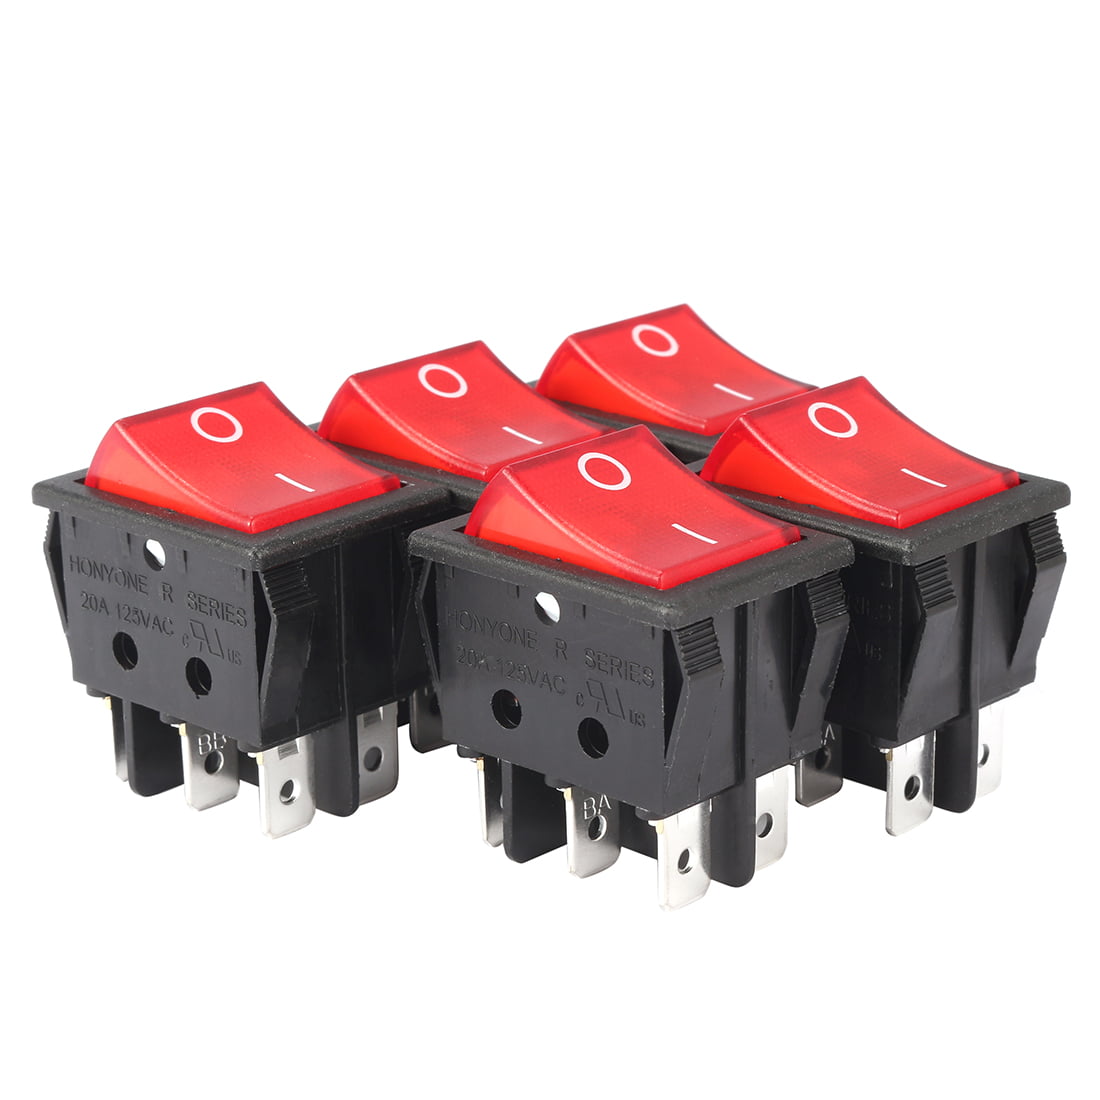 AC 20A/125V 22A/250V DPDT 6Pin 2 Position Illuminated Red rocker switch *4 PACK*